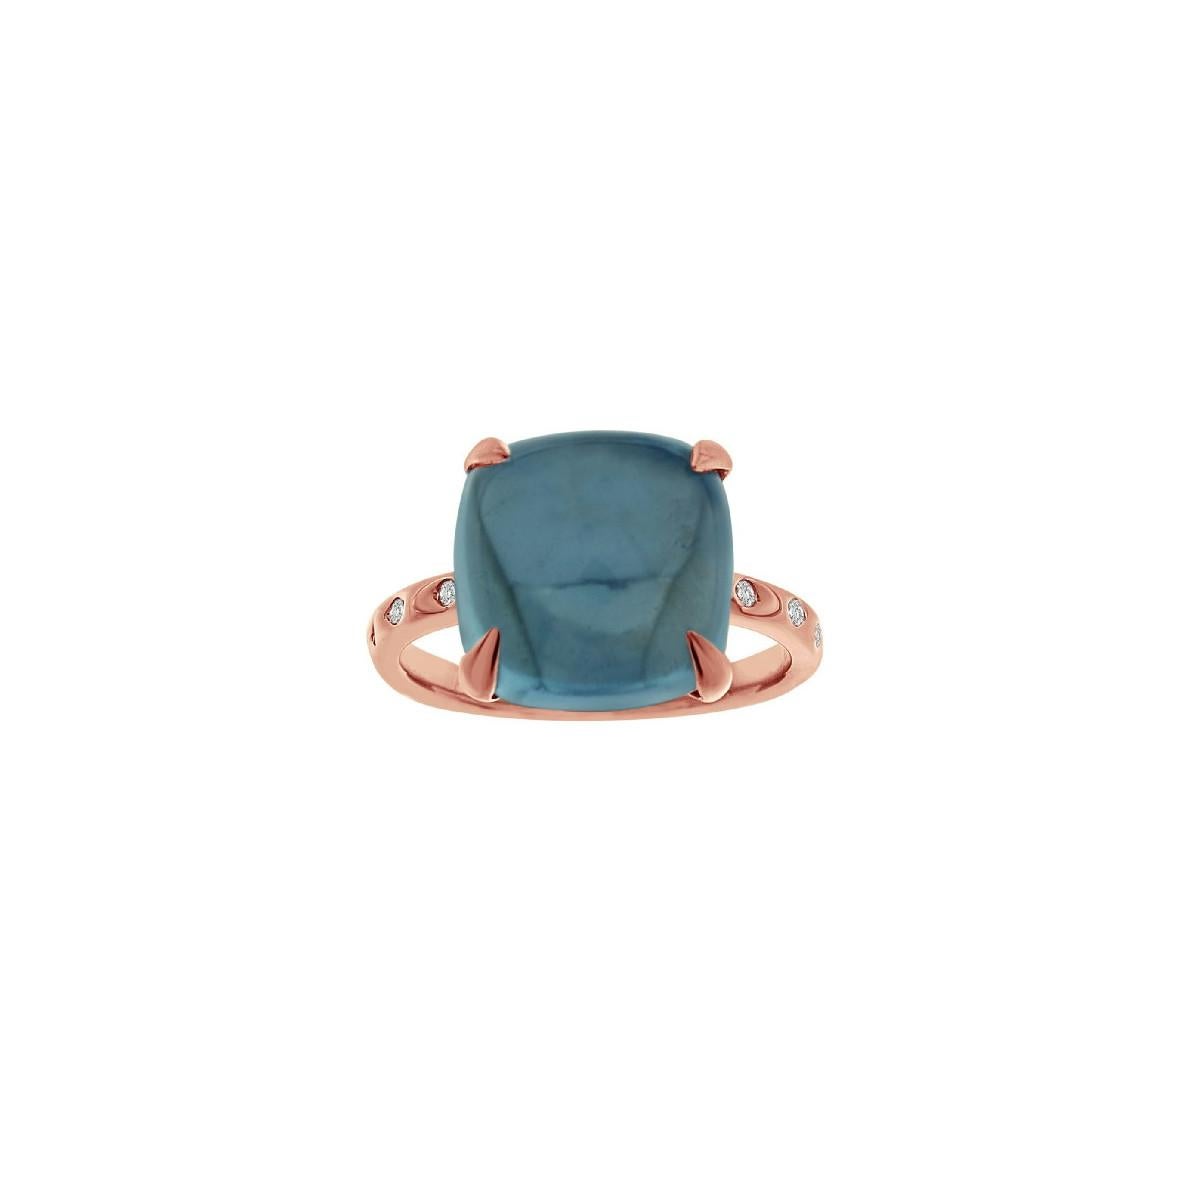 18K Rose Gold Ring witn diamonds and topaz

Rose Gold 18K
20 Diamonds 0.44ct.
1 Blue Topaz 10.87ct.
Weight 3.72gr.

ALSO AVAILABLE
Rose Gold 18Kt
6 Diamonds 0.07ct.
1 Topaz 10.78ct.
Weight 3.98gr.
€2200 / $2200 approx

ALSO AVAILABLE
Rose Gold